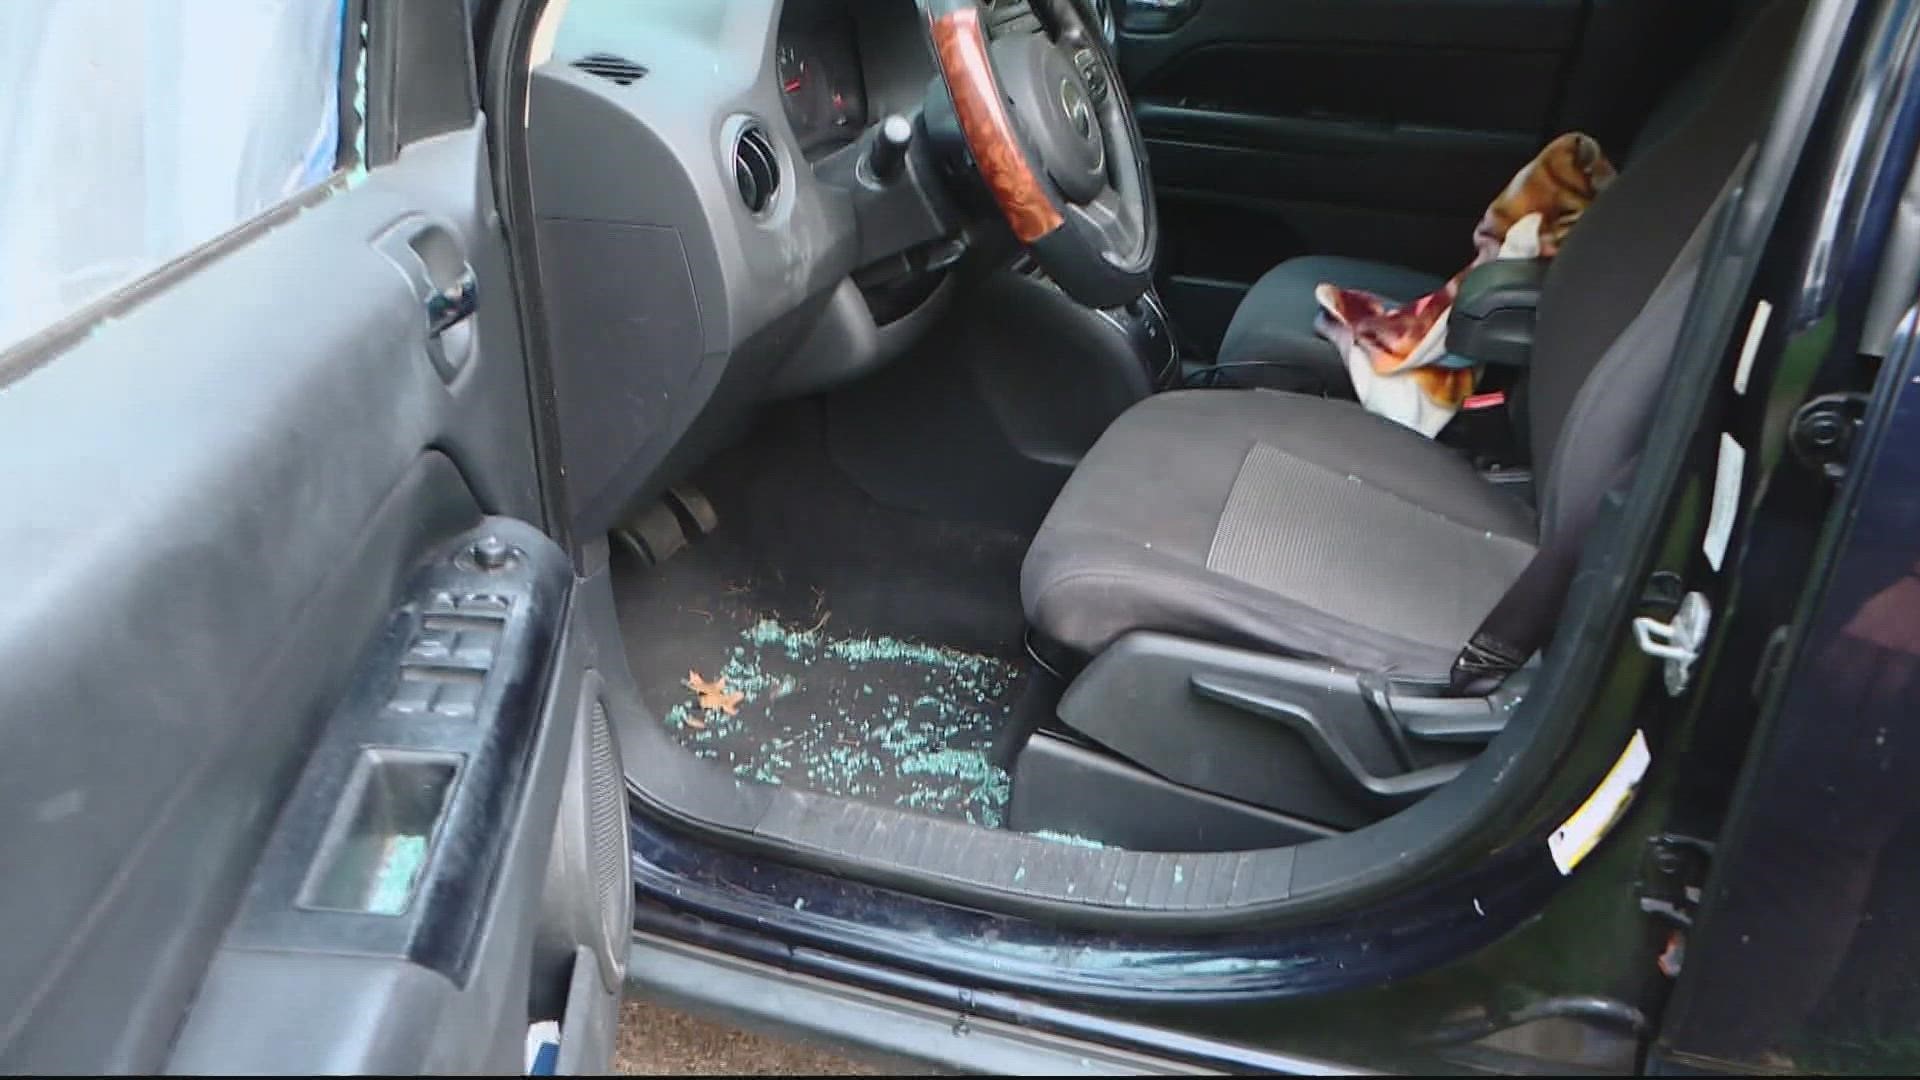 Police say someone smashed the windows of more than 20-cars -- in ONE night. Now they're looking for the vandal.